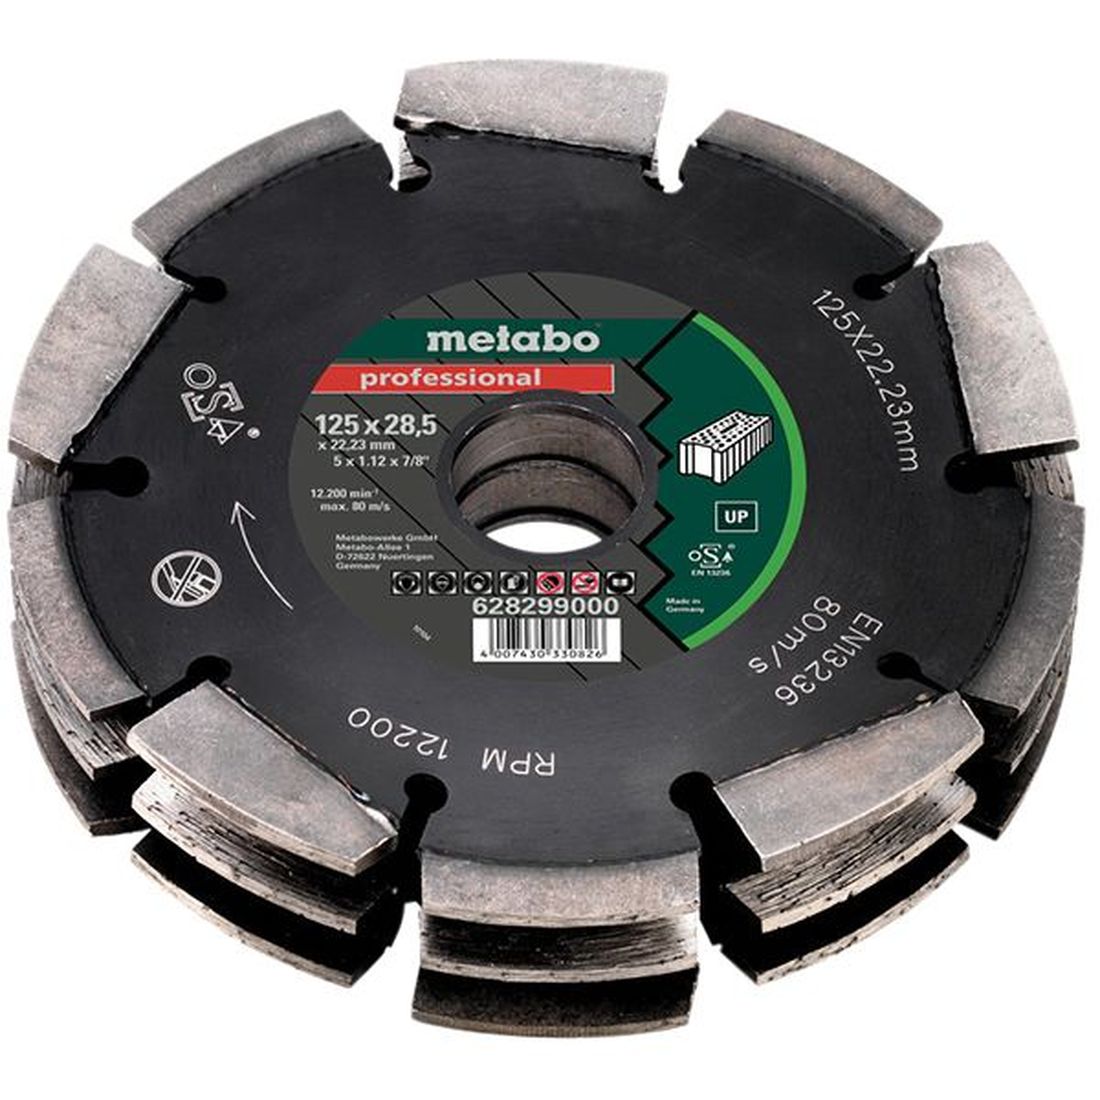 Metabo 3 Row Professional UP Universal Wall Chaser Blade 125 x 28.5 x 22.23mm          